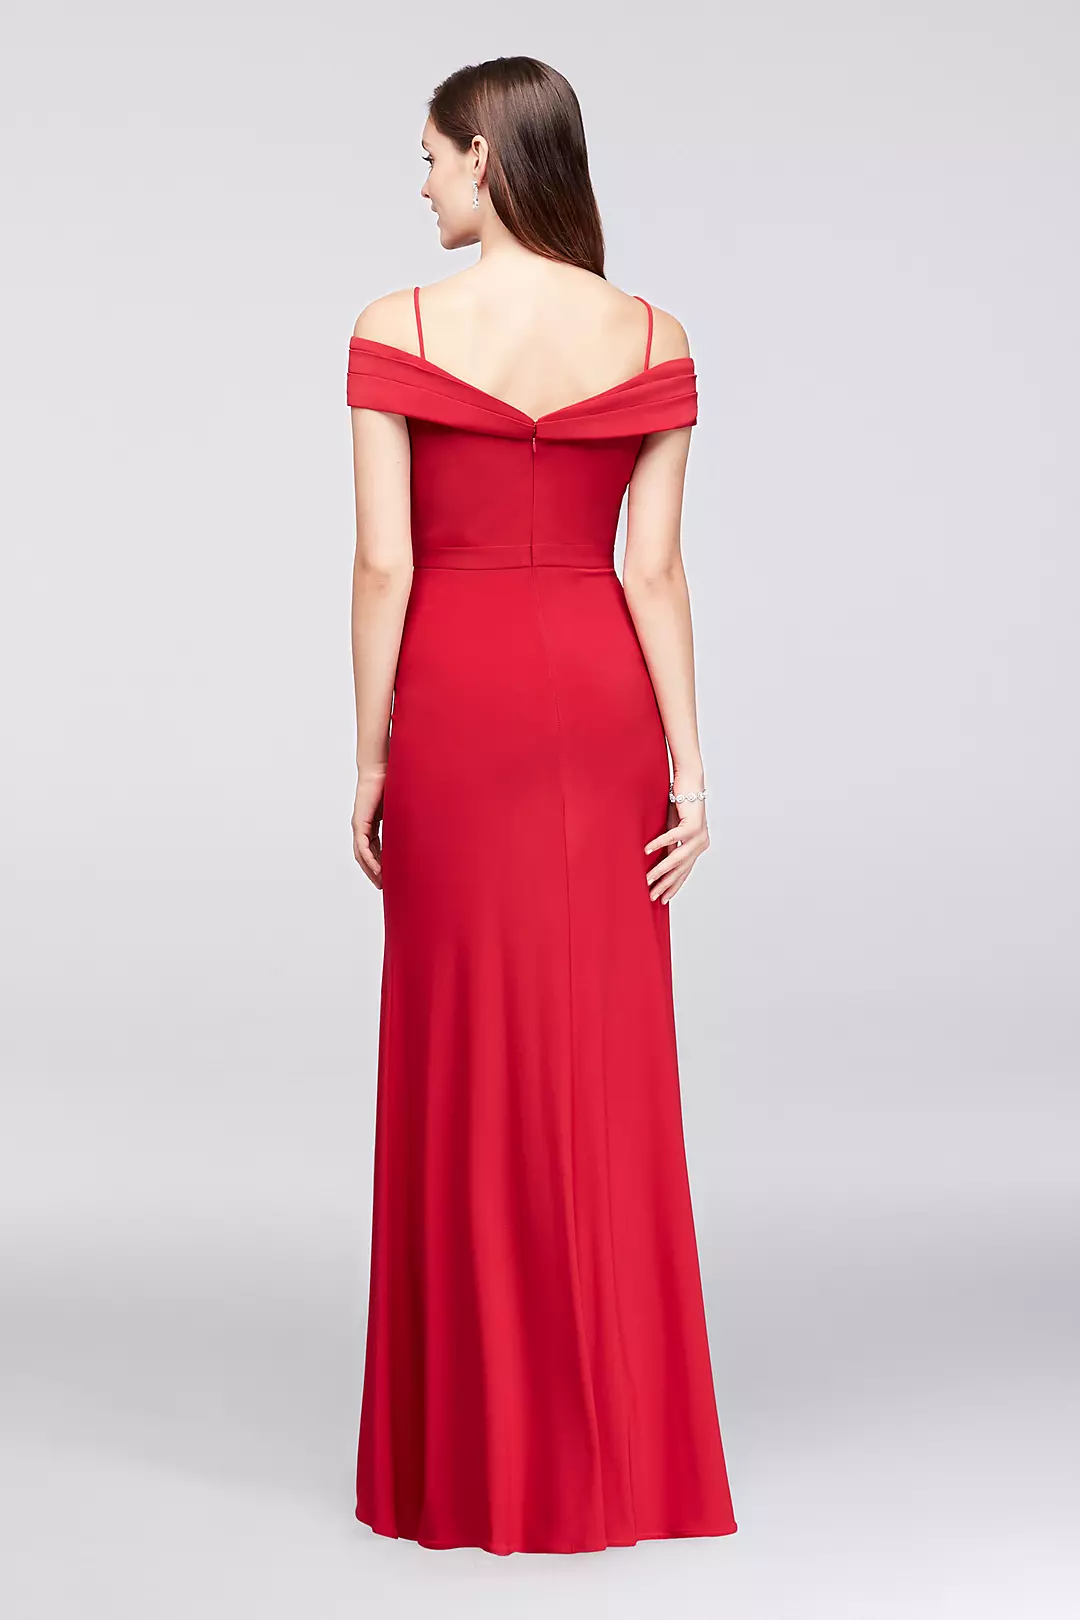 Off-the-Shoulder Jersey Gown with Spaghetti Straps Image 2